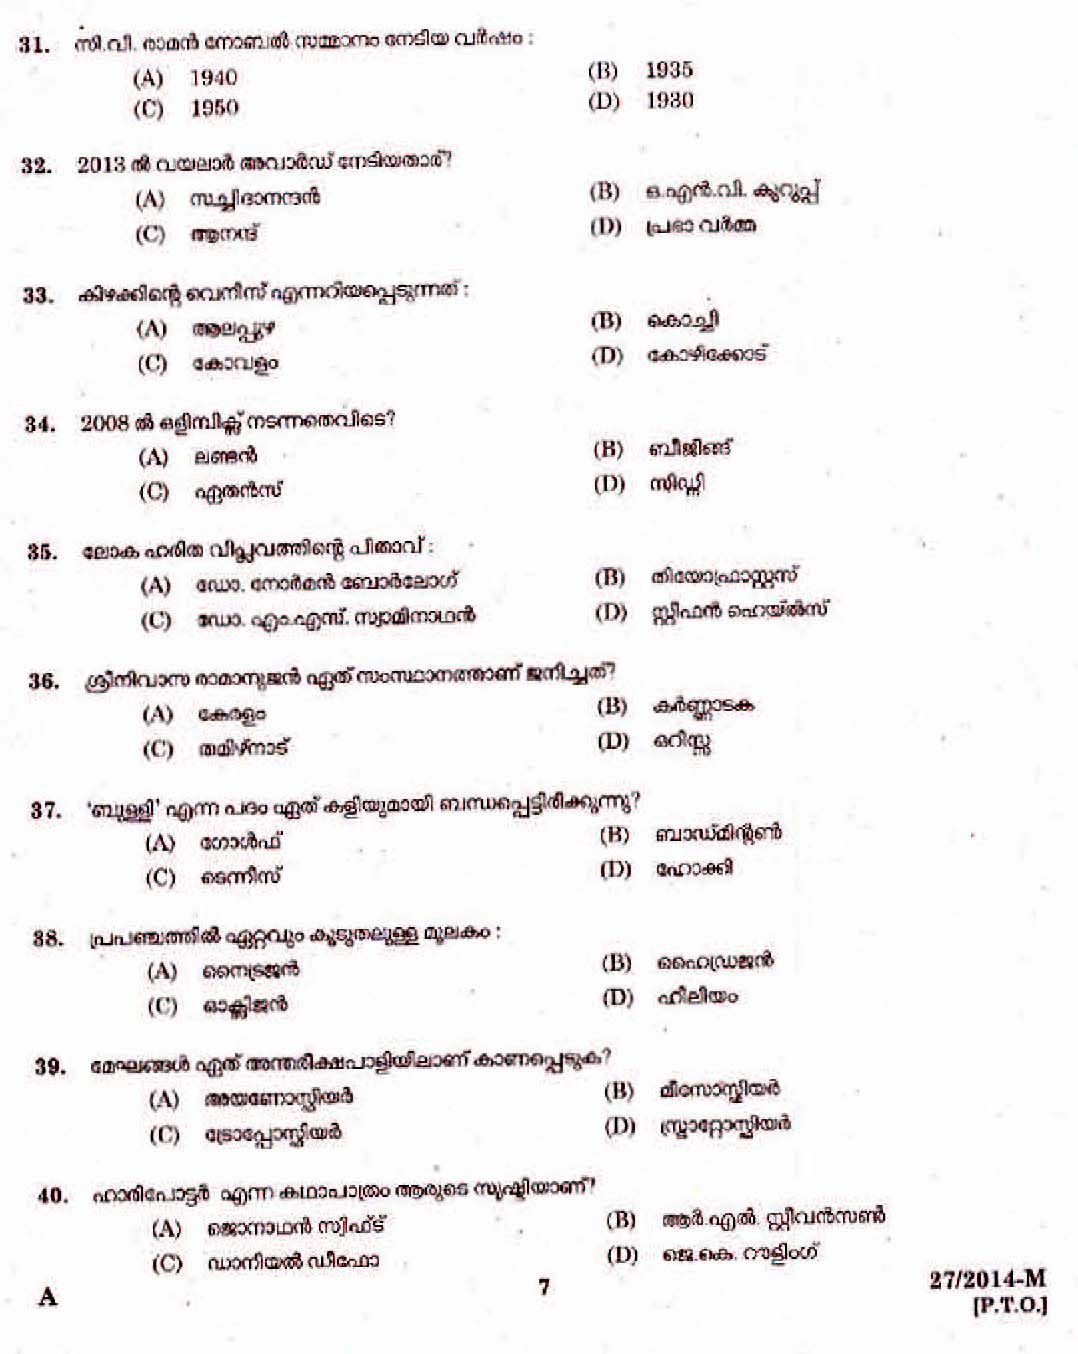 LD Clerk All Districts Question Paper Malayalam 2014 Paper Code 272014 M 5